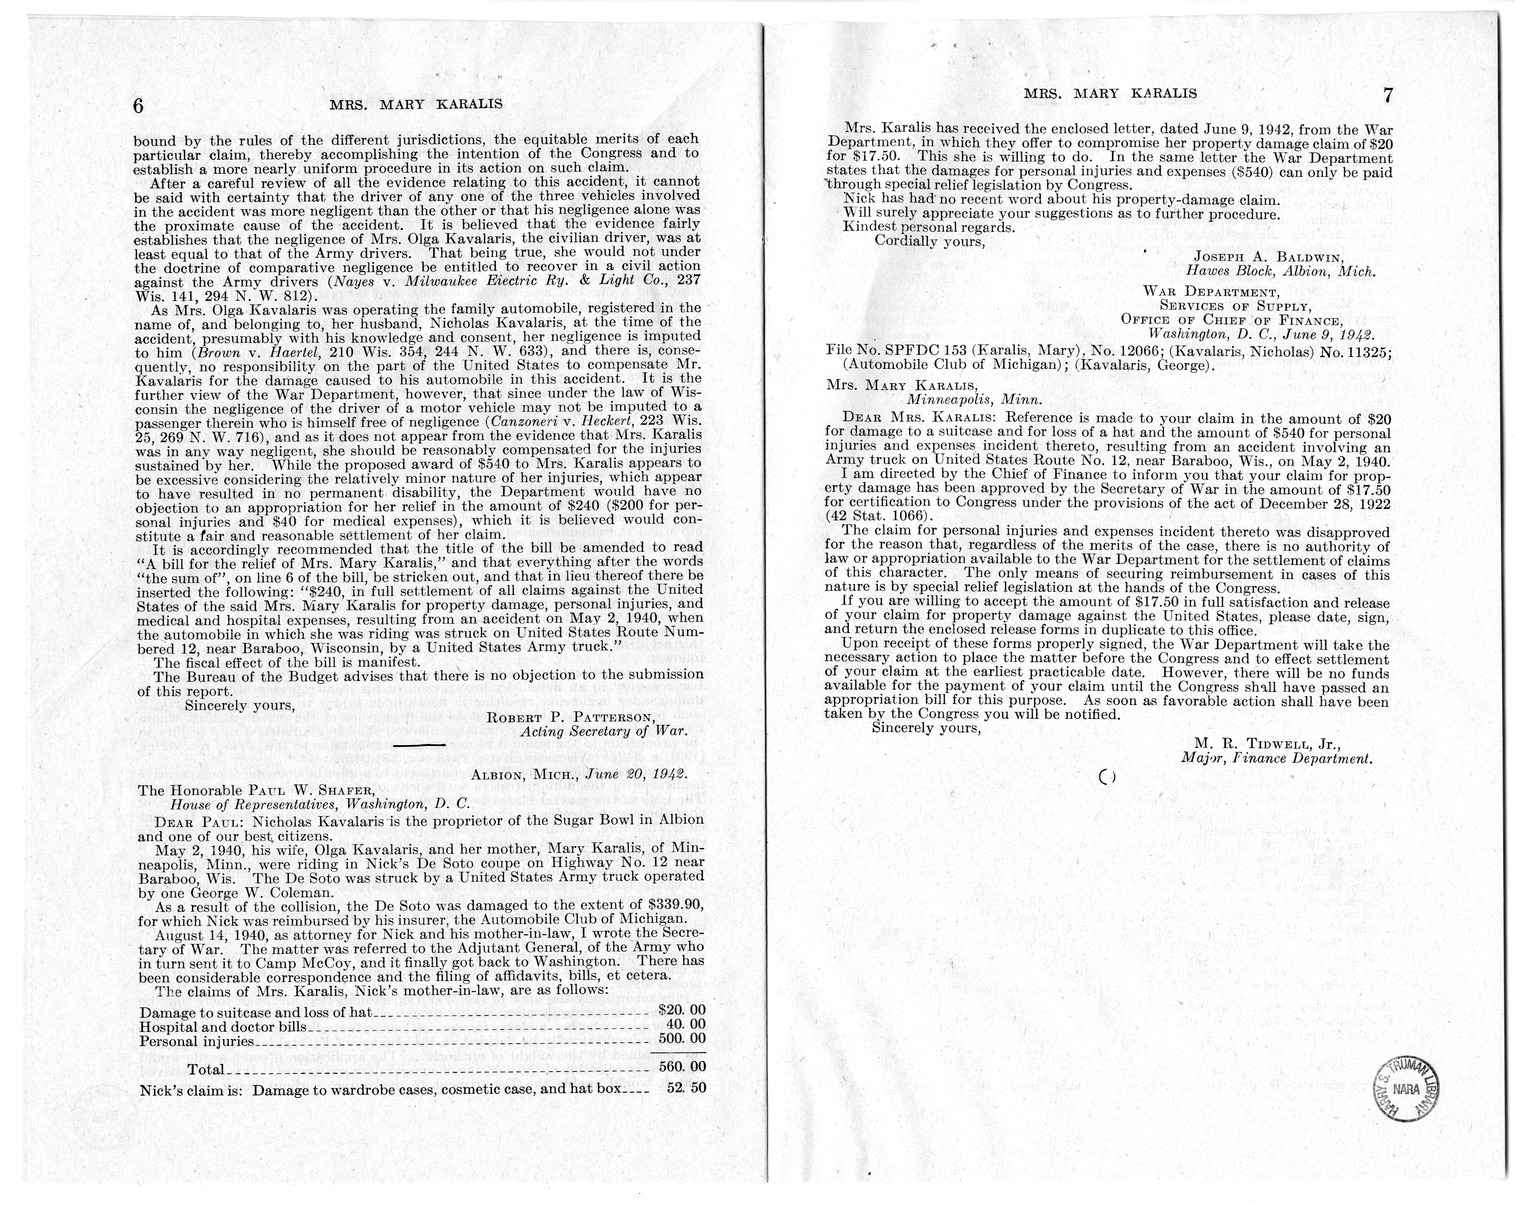 Memorandum from Frederick J. Bailey to M. C. Latta, H.R. 1054, For the Relief of Mrs. Mary Karalis, with Attachments